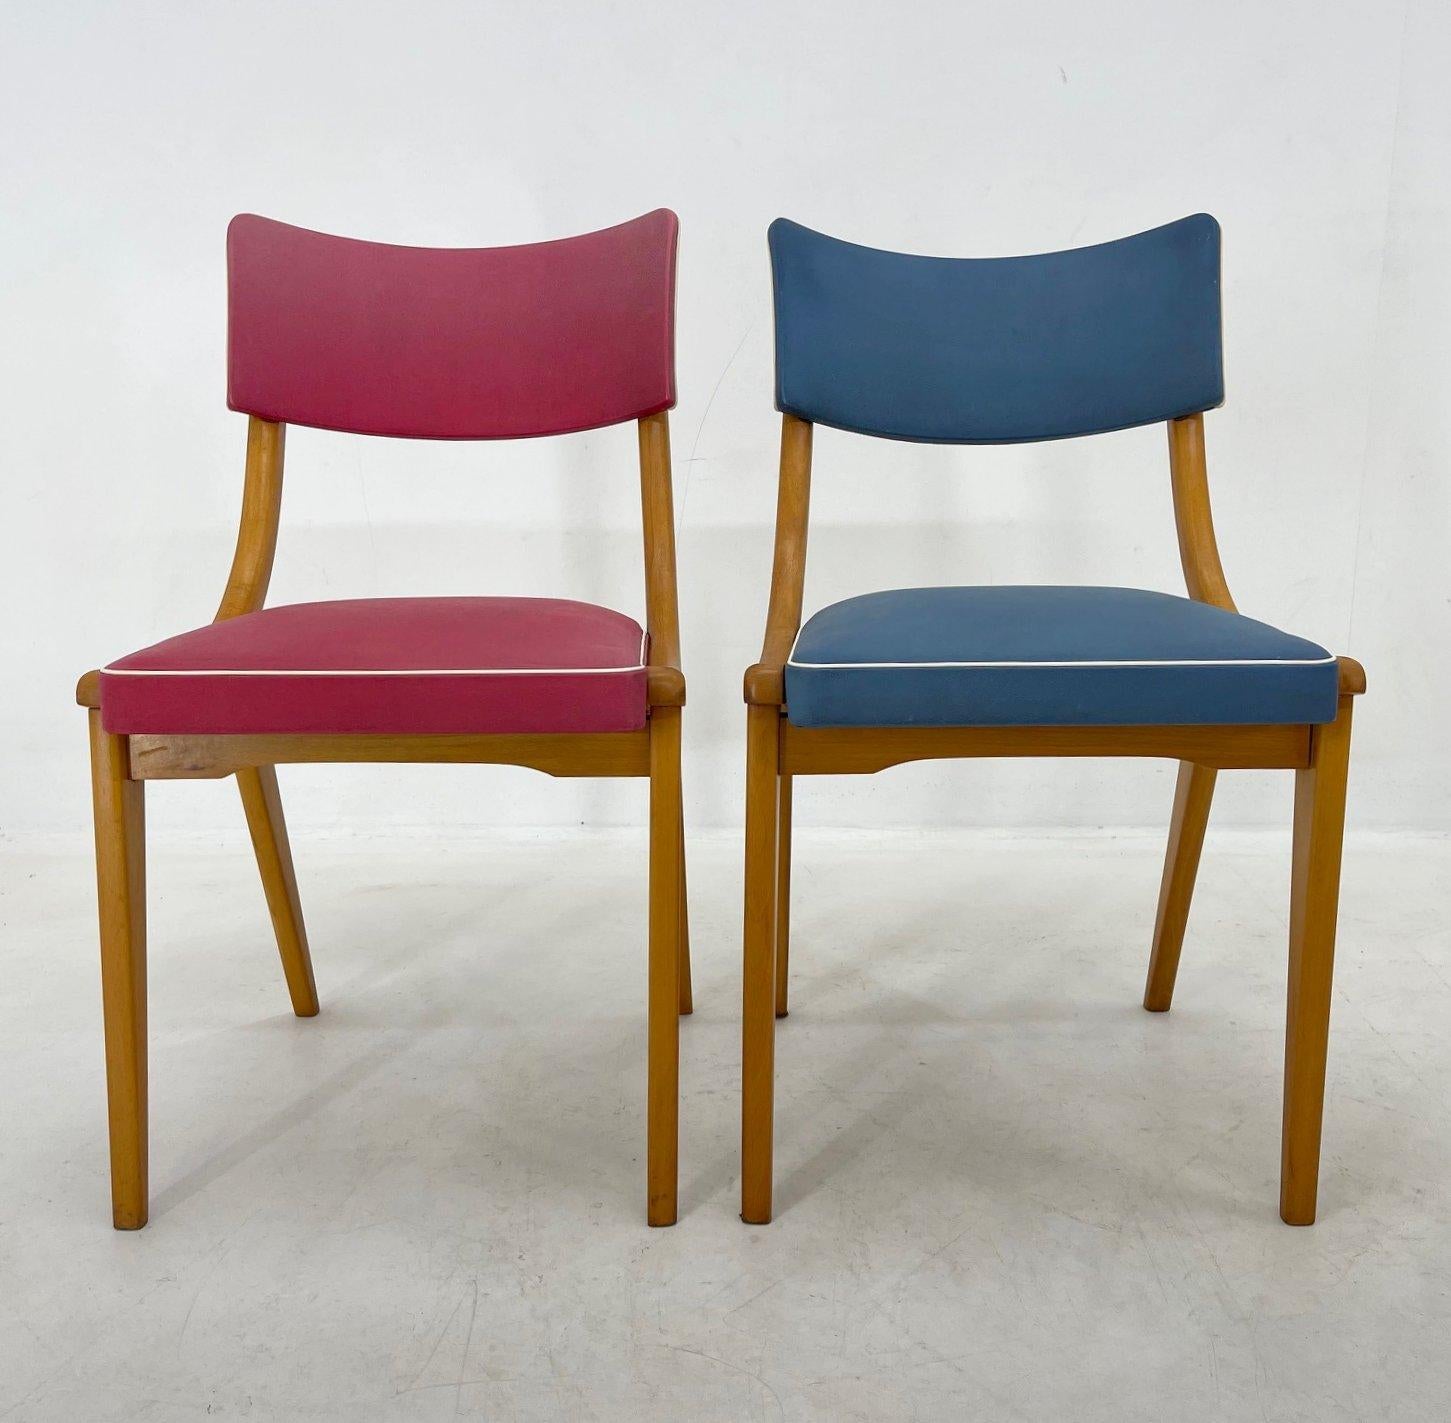 Set of 2 Colourful Vintage Chairs, Germany, 1960's For Sale 1